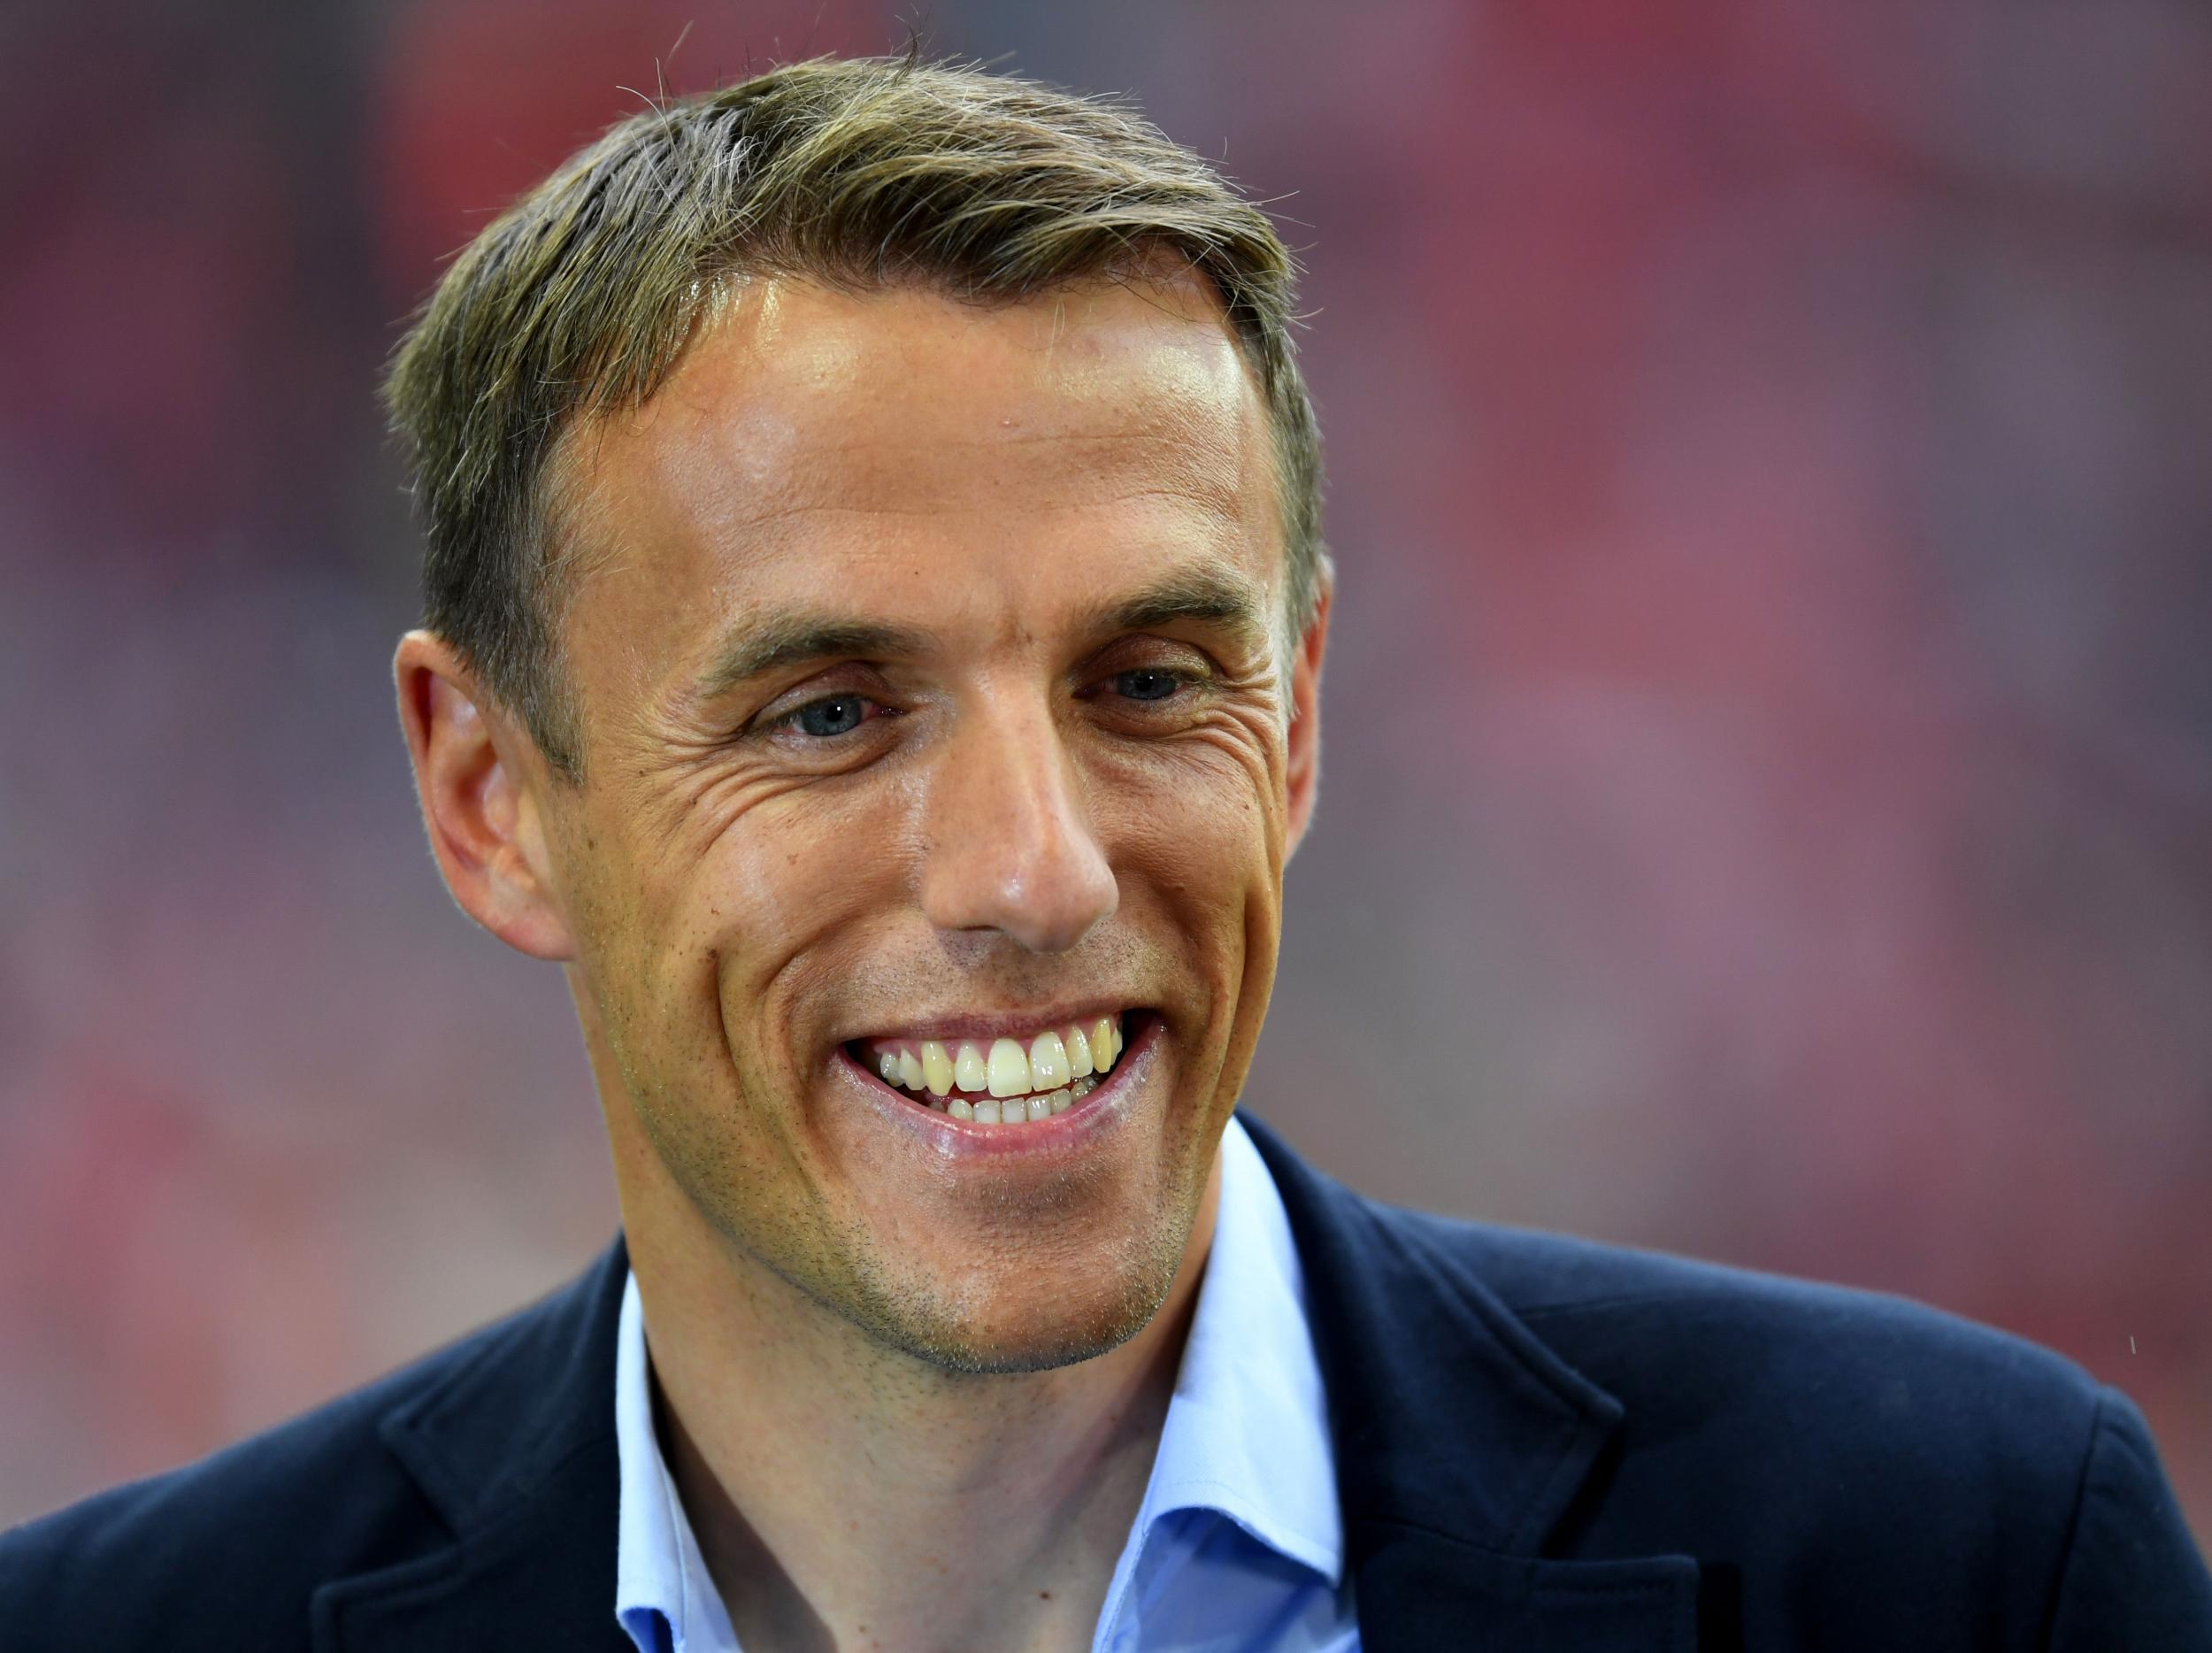 Neville is a well-known face, but is he a qualified coach for the England womens football team?